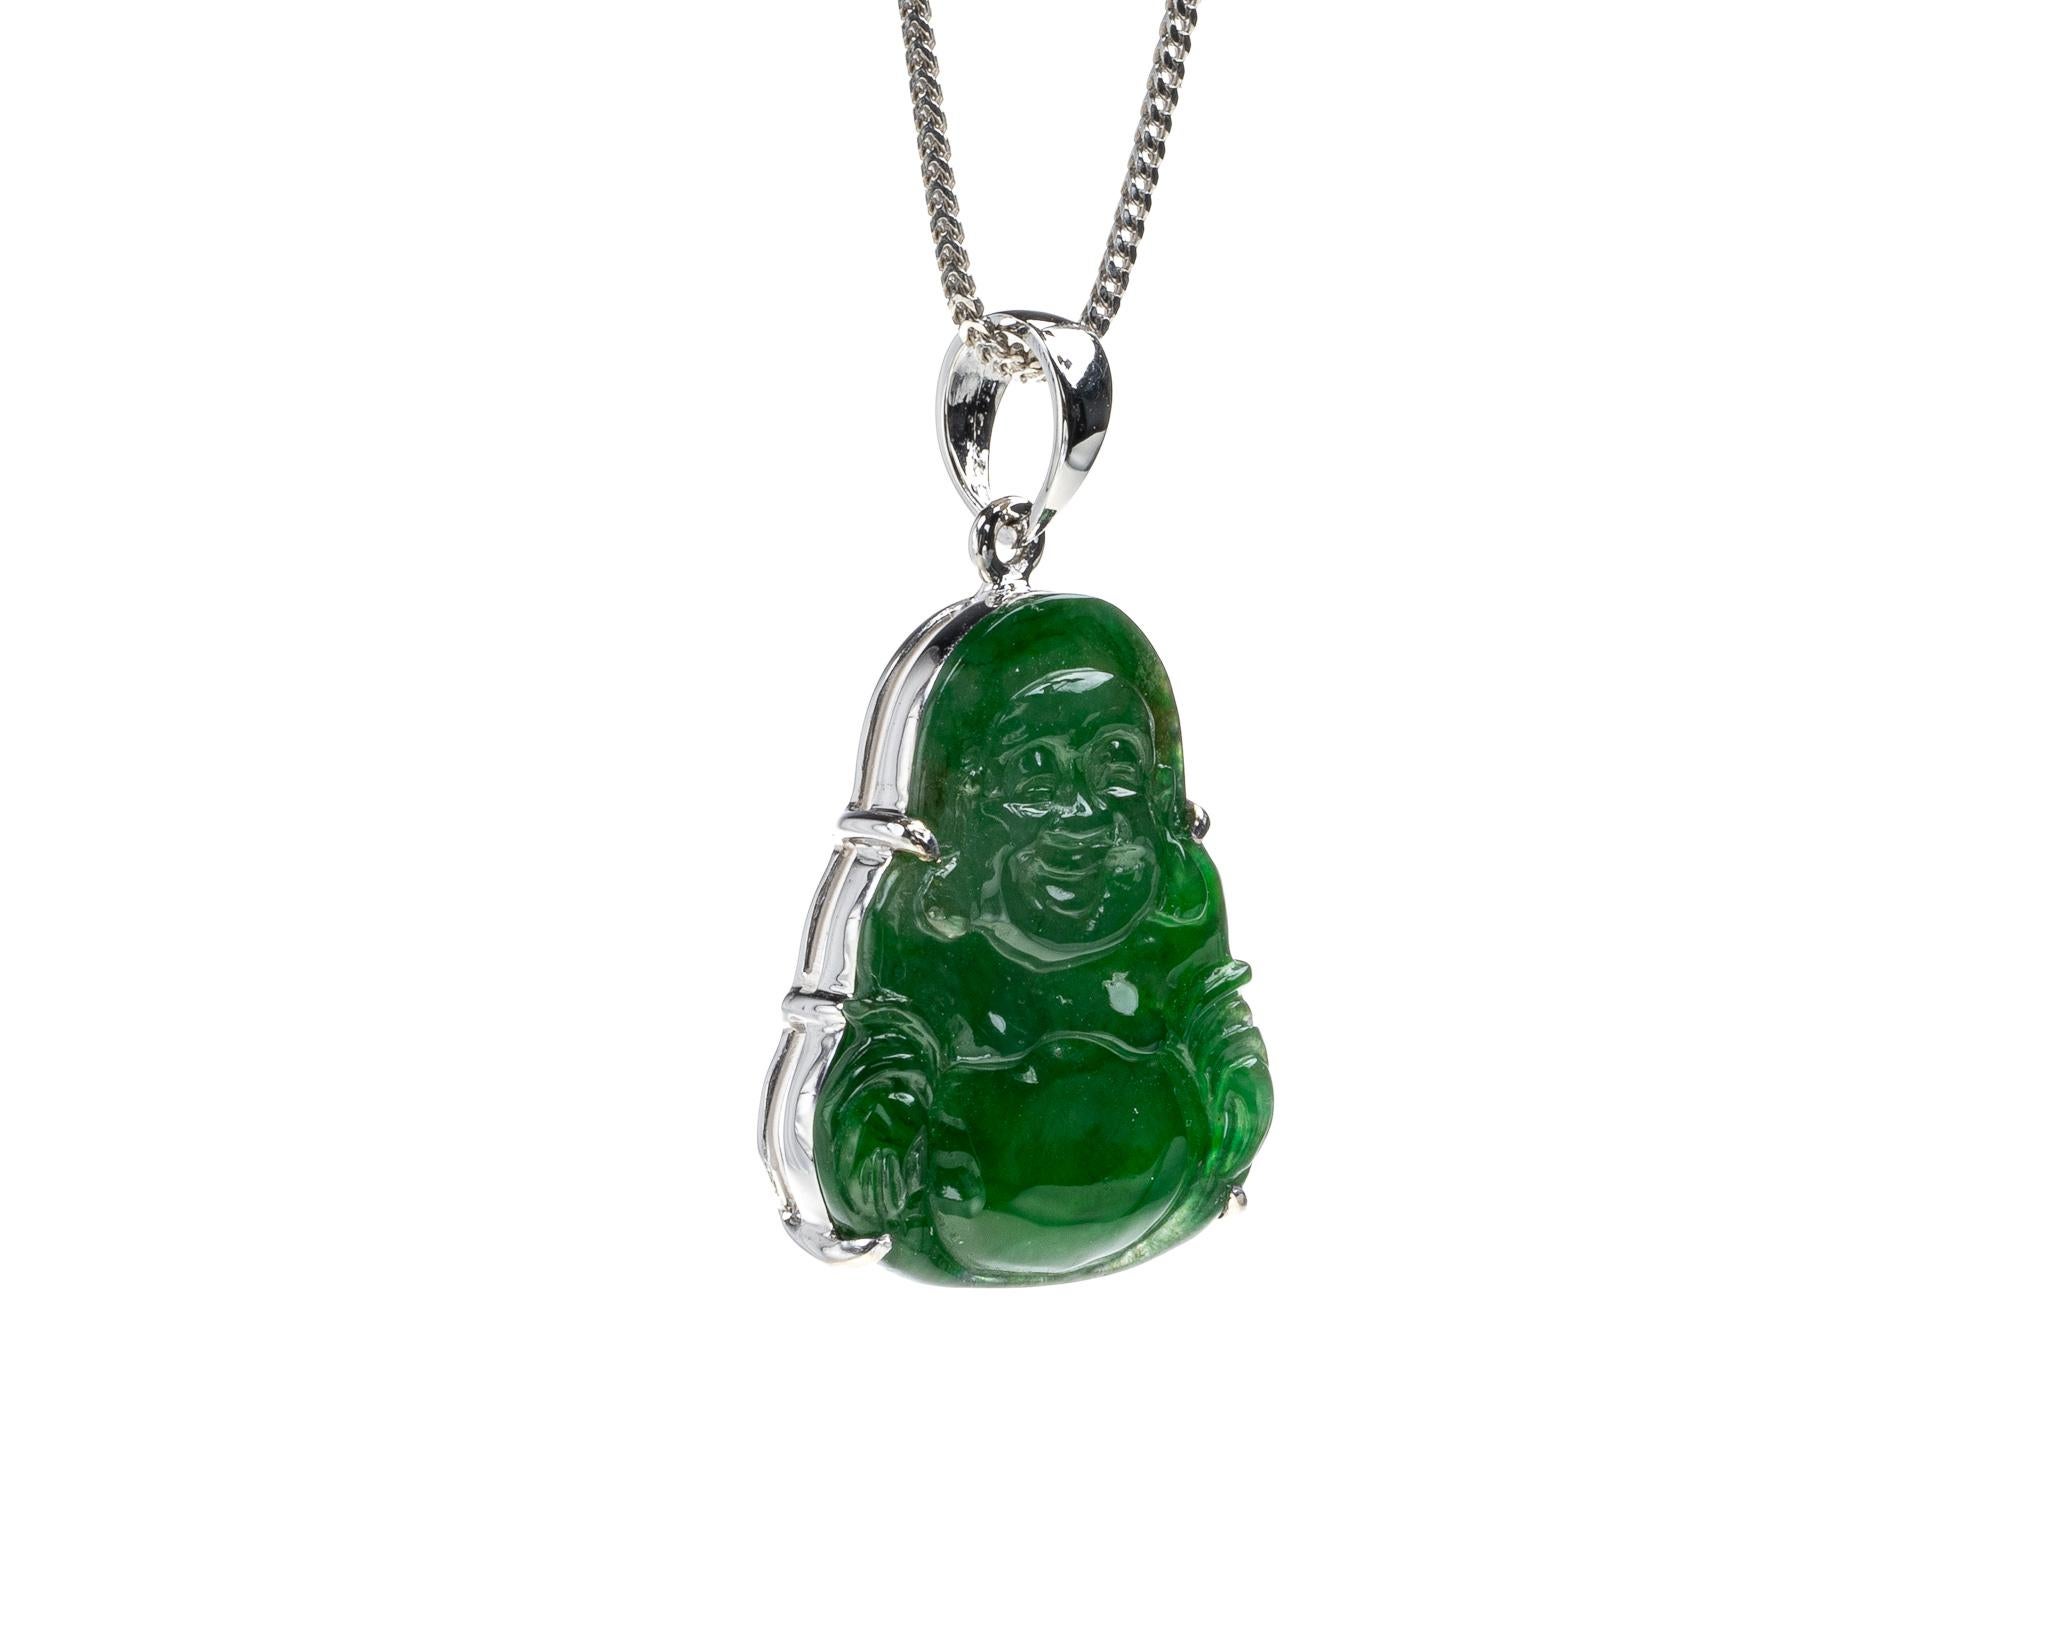 This is an all natural, untreated glassy green jadeite jade carved happy buddha and set on an 18K white gold bail.  The carved happy buddha symbolizes happiness, compassion and protection.    

It measures 0.70 inches (17.9 mm) x 0.84 inches (21.5